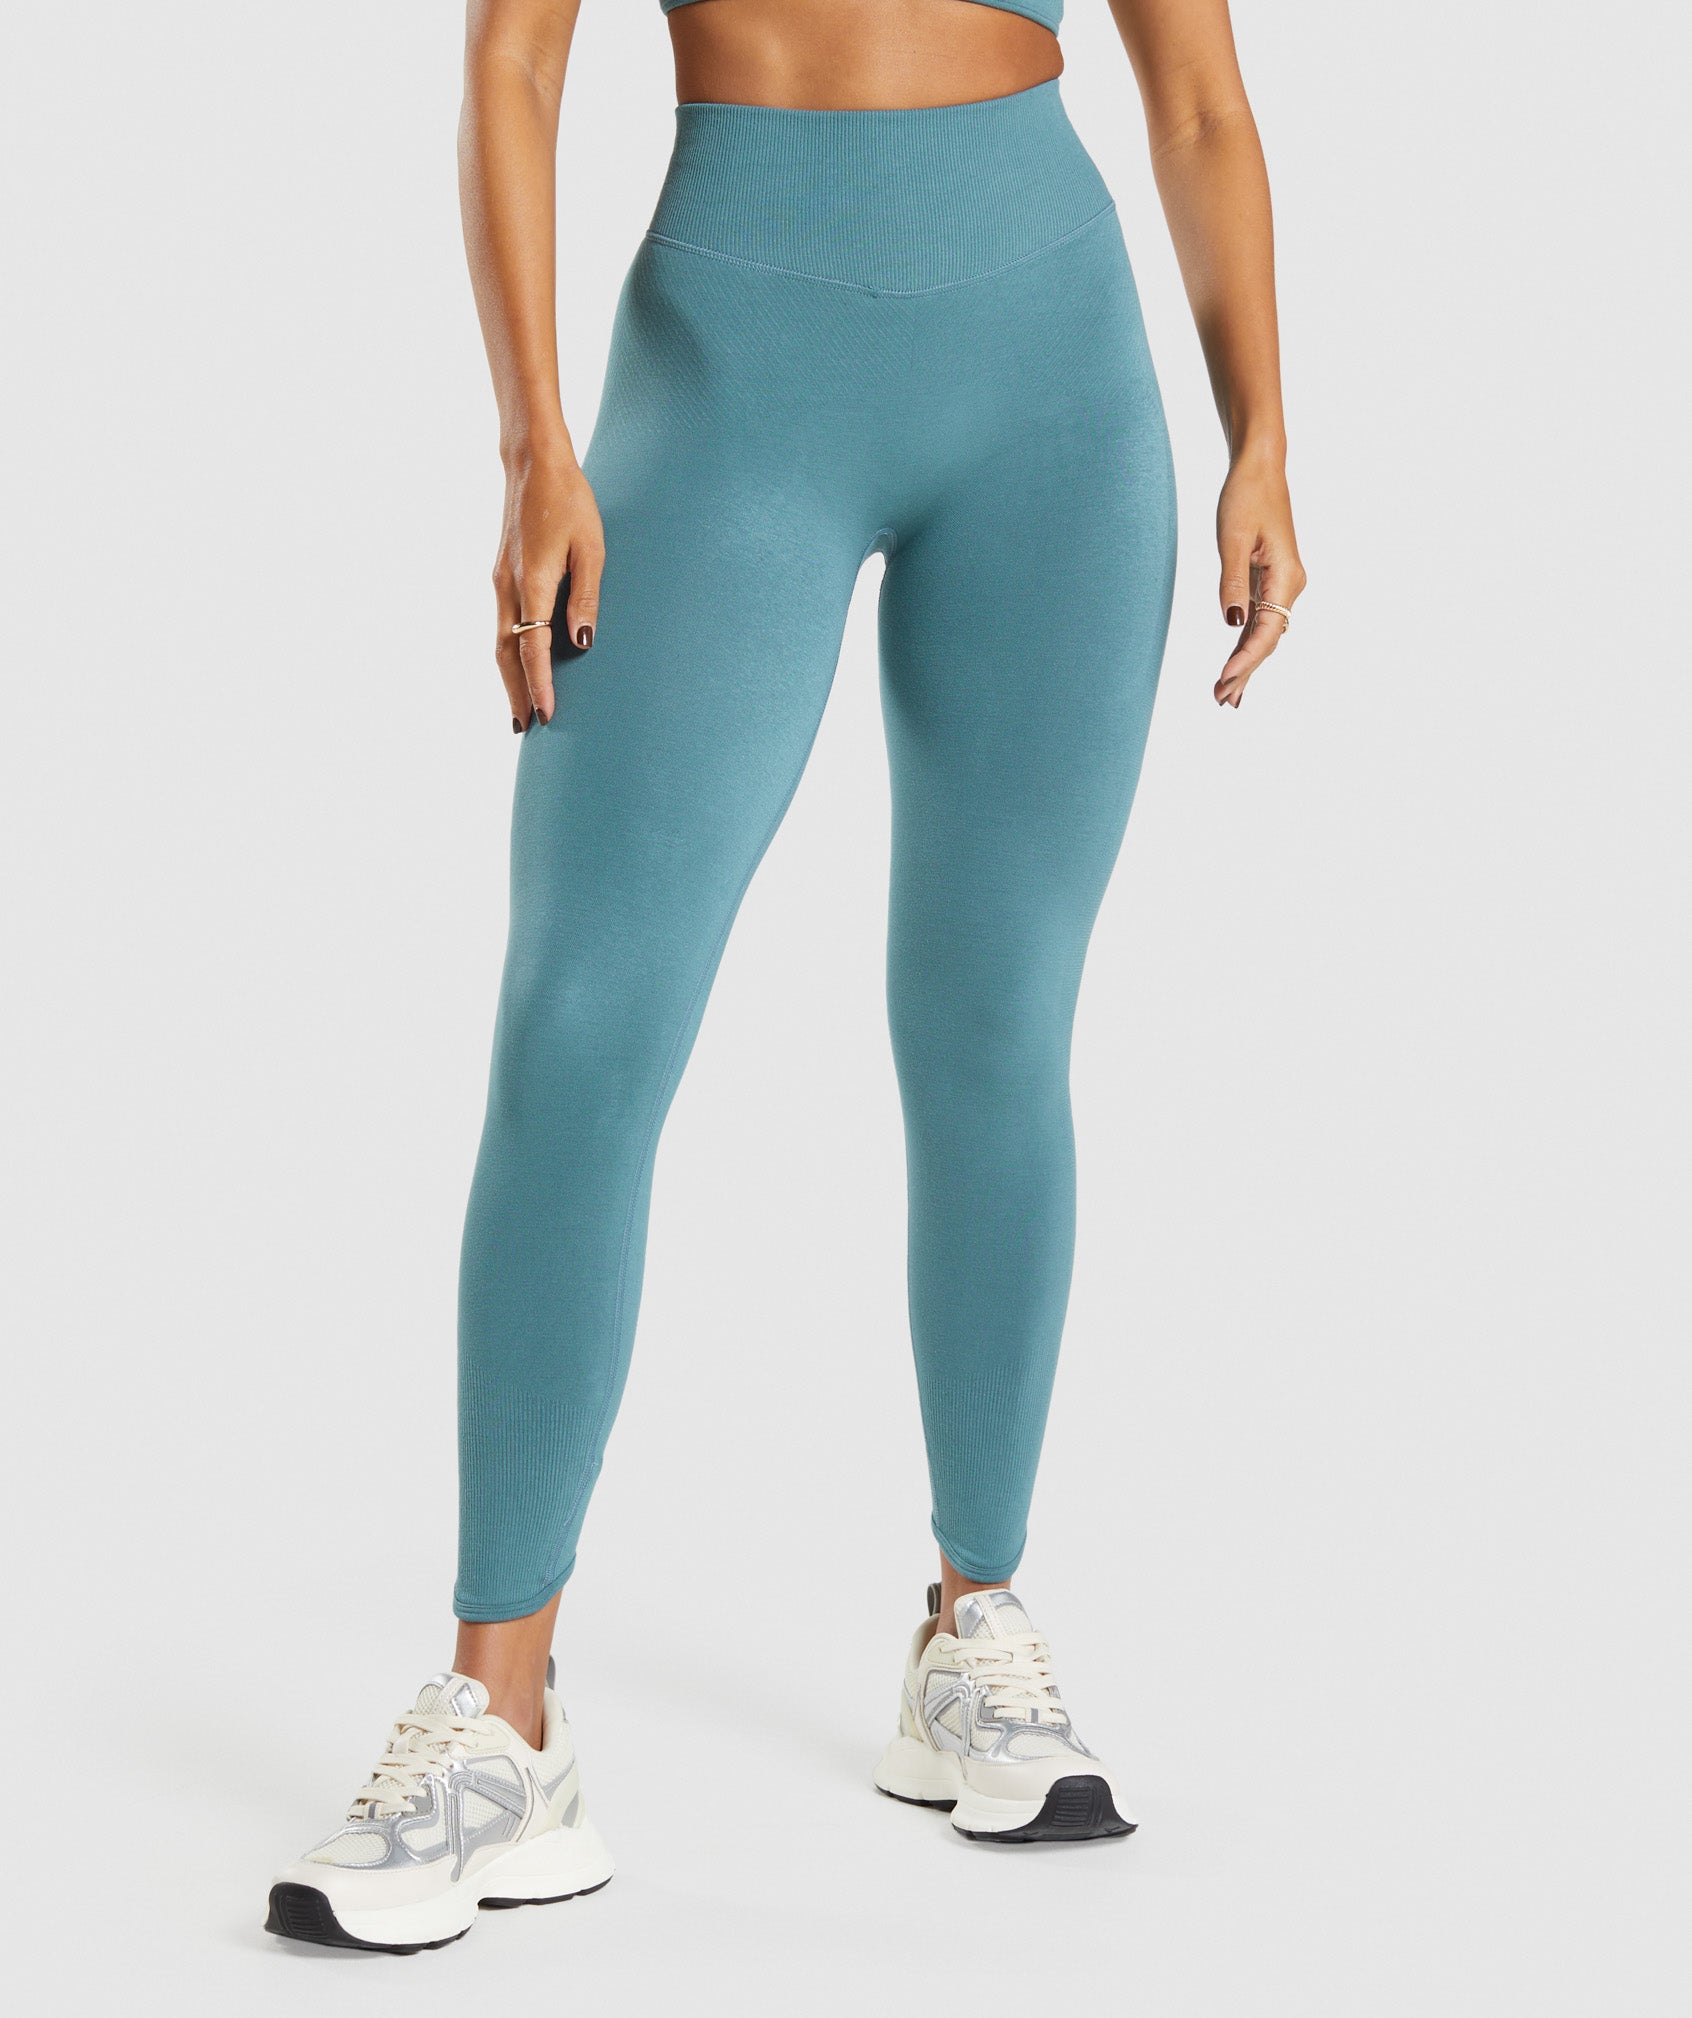 Rest Day Seamless Leggings in Charred Blue - view 1